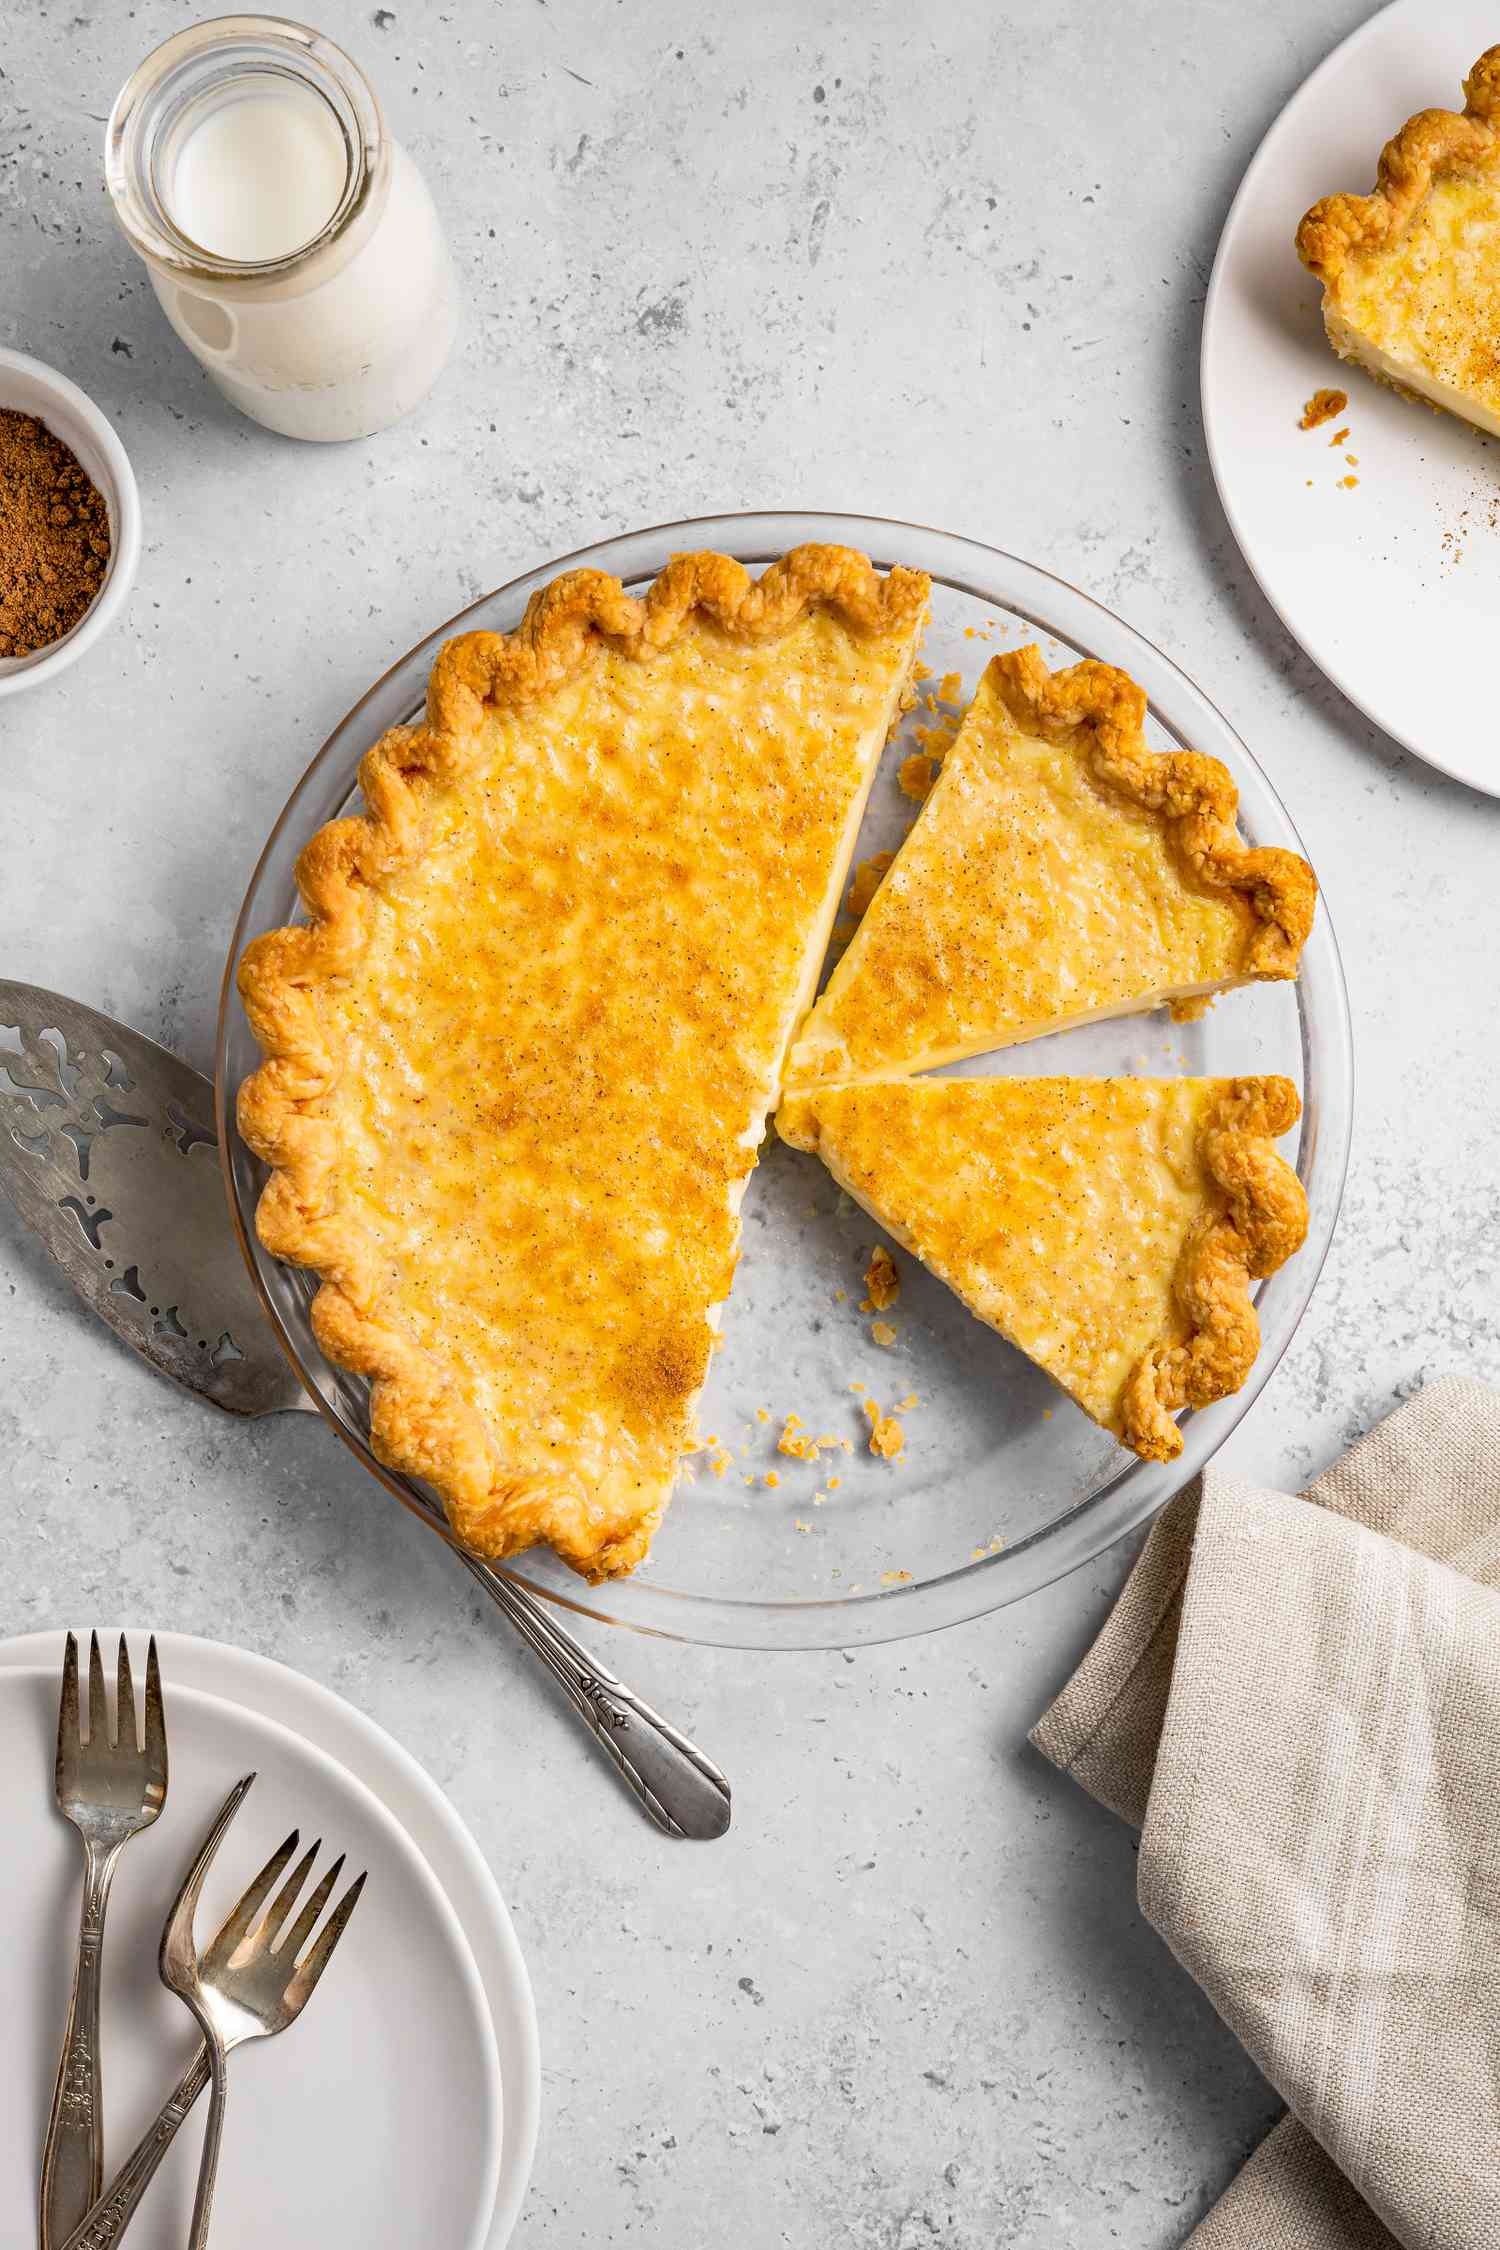 Egg Custard Pie Cut into Slices Next to a Pie Server, Jar of Milk, and Plate with Forks